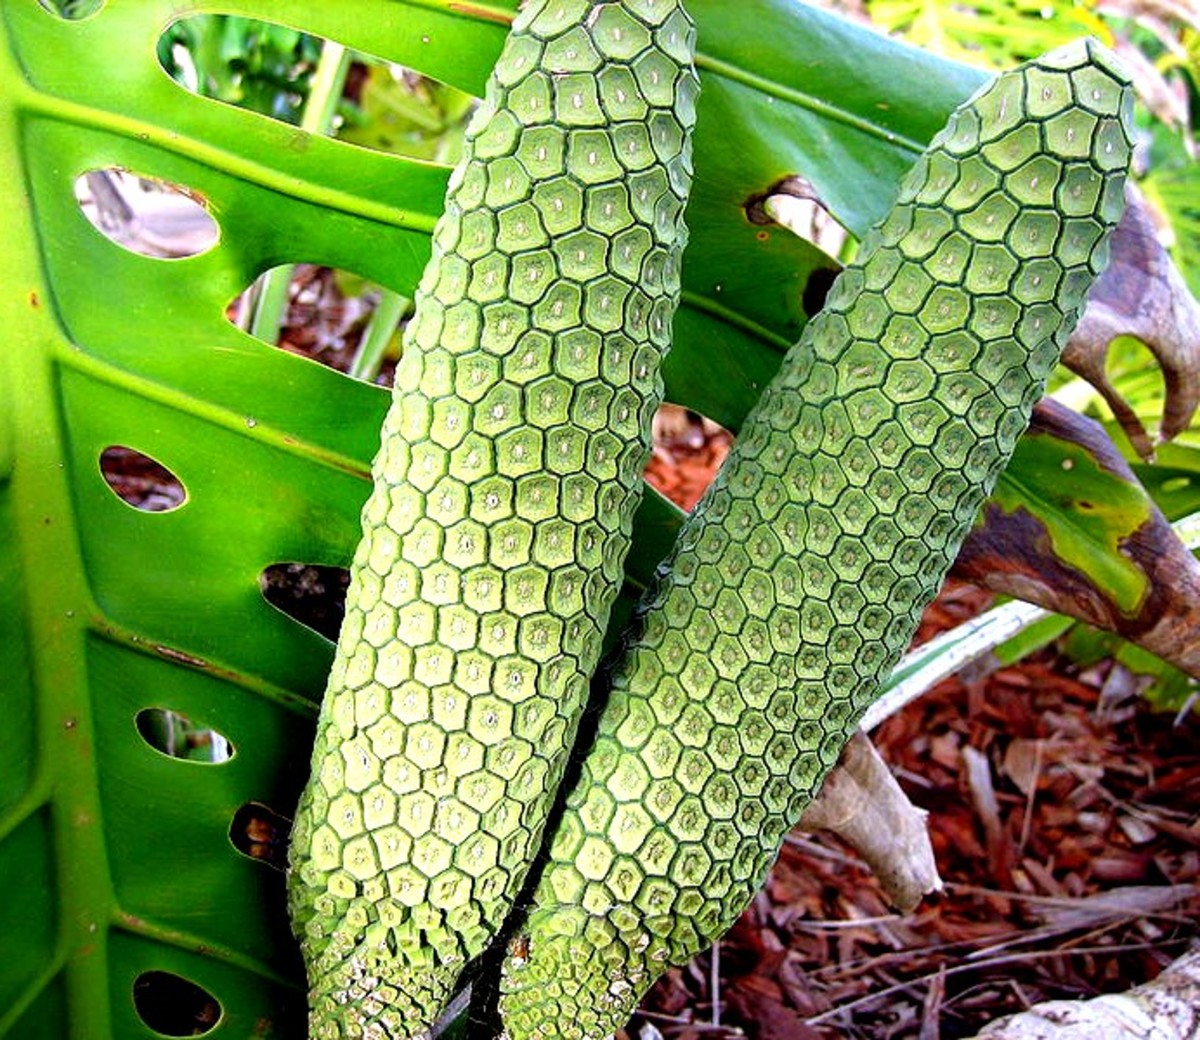 Monstera deliciosa, the delicious monster fruit that can kill you if eaten at the wrong time